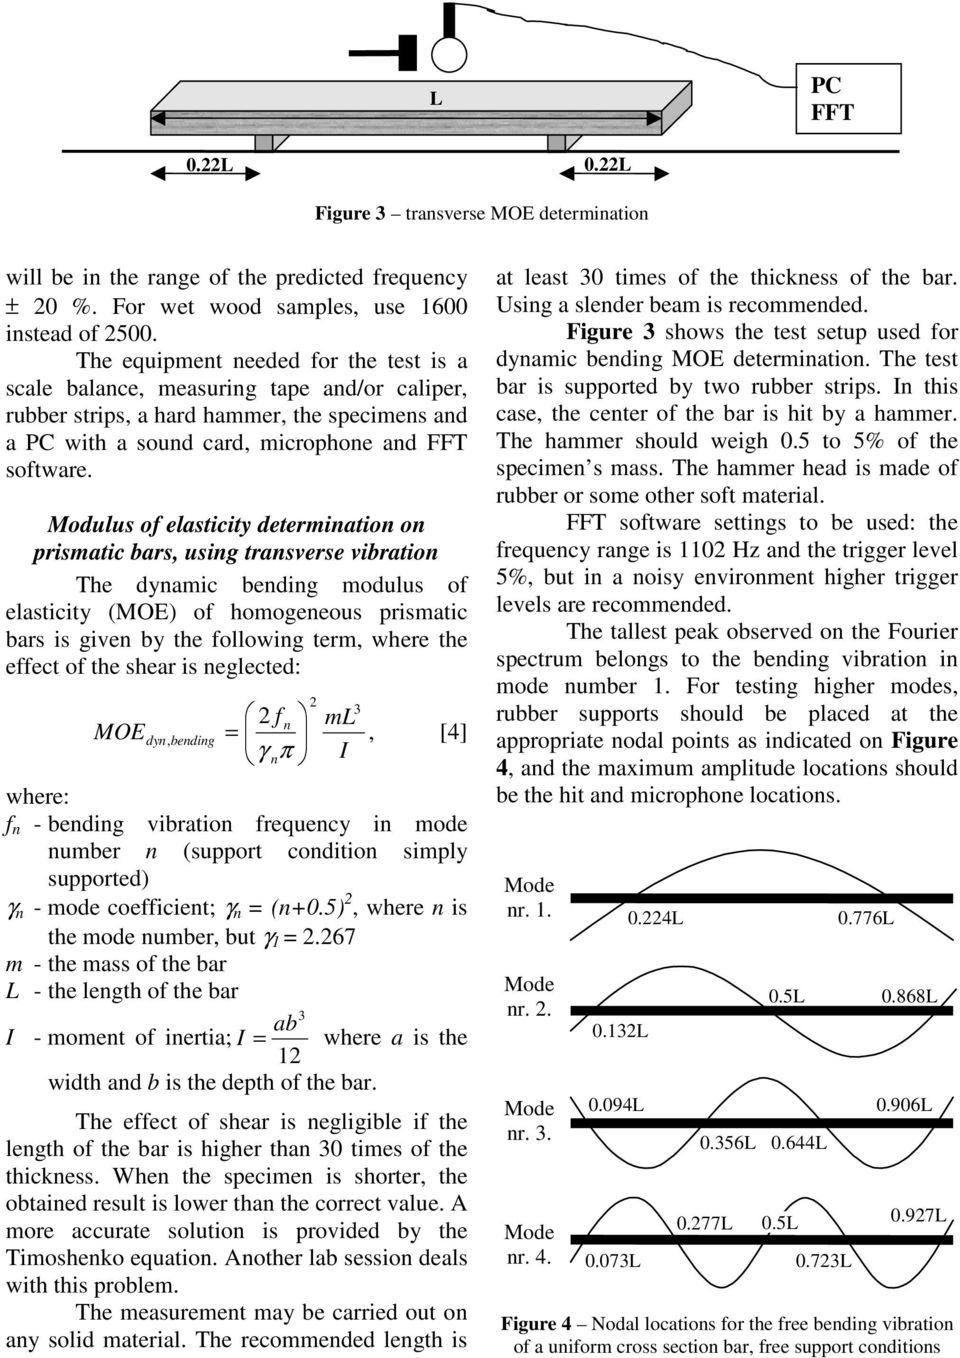 Modulus of elasticity determination on prismatic bars, using transverse vibration The dynamic bending modulus of elasticity (MOE) of homogeneous prismatic bars is given by the following term, where